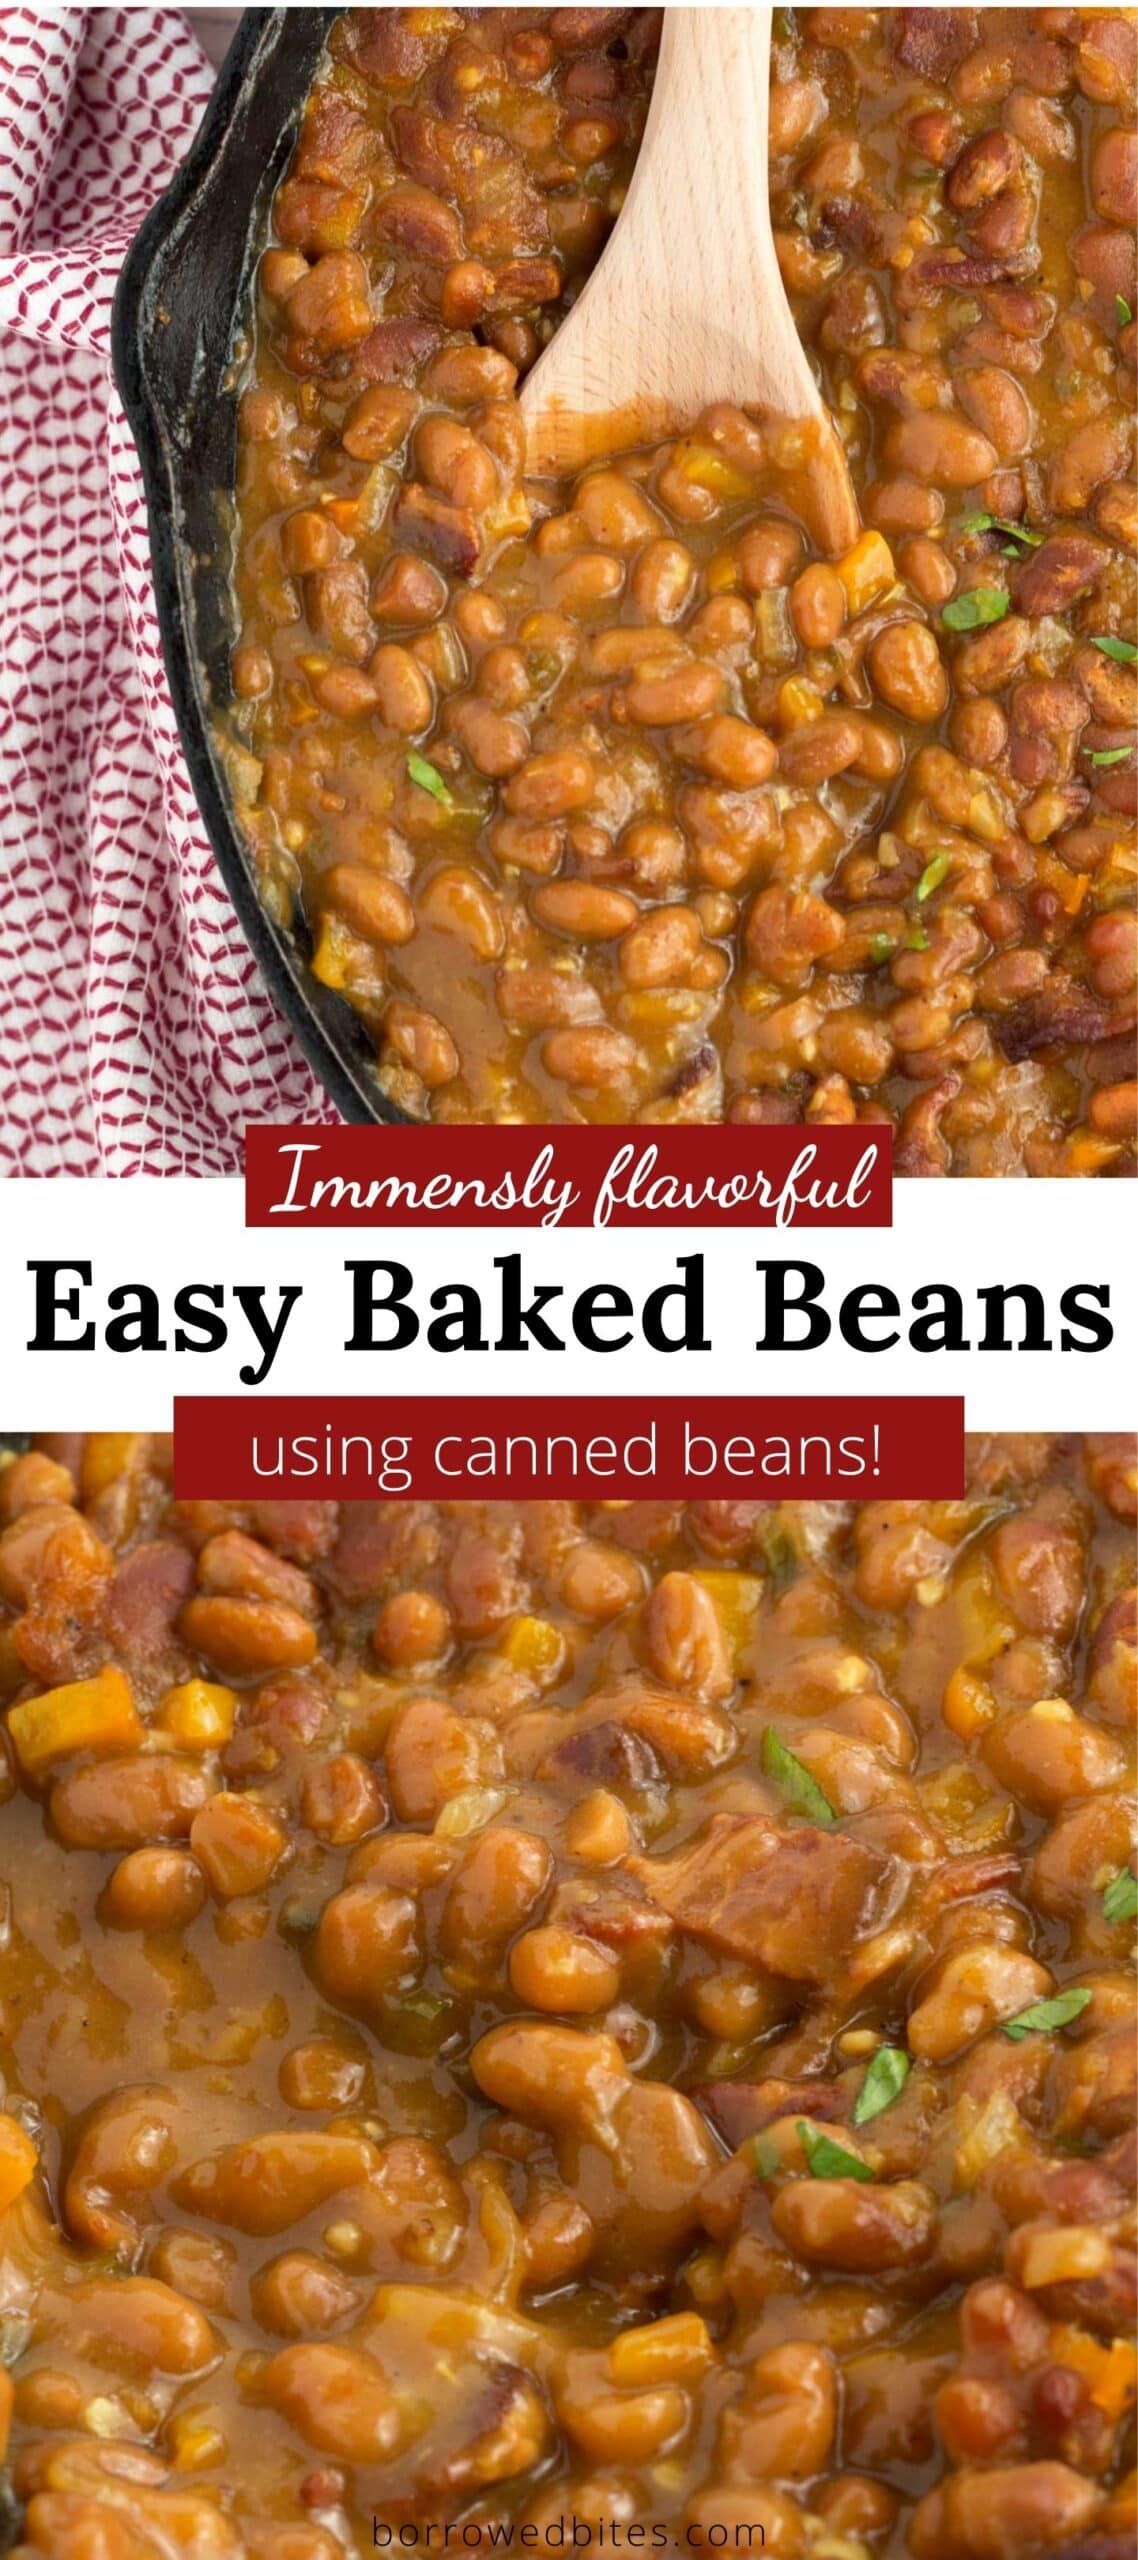 Thick & Rich Canned Baked Beans - Borrowed Bites